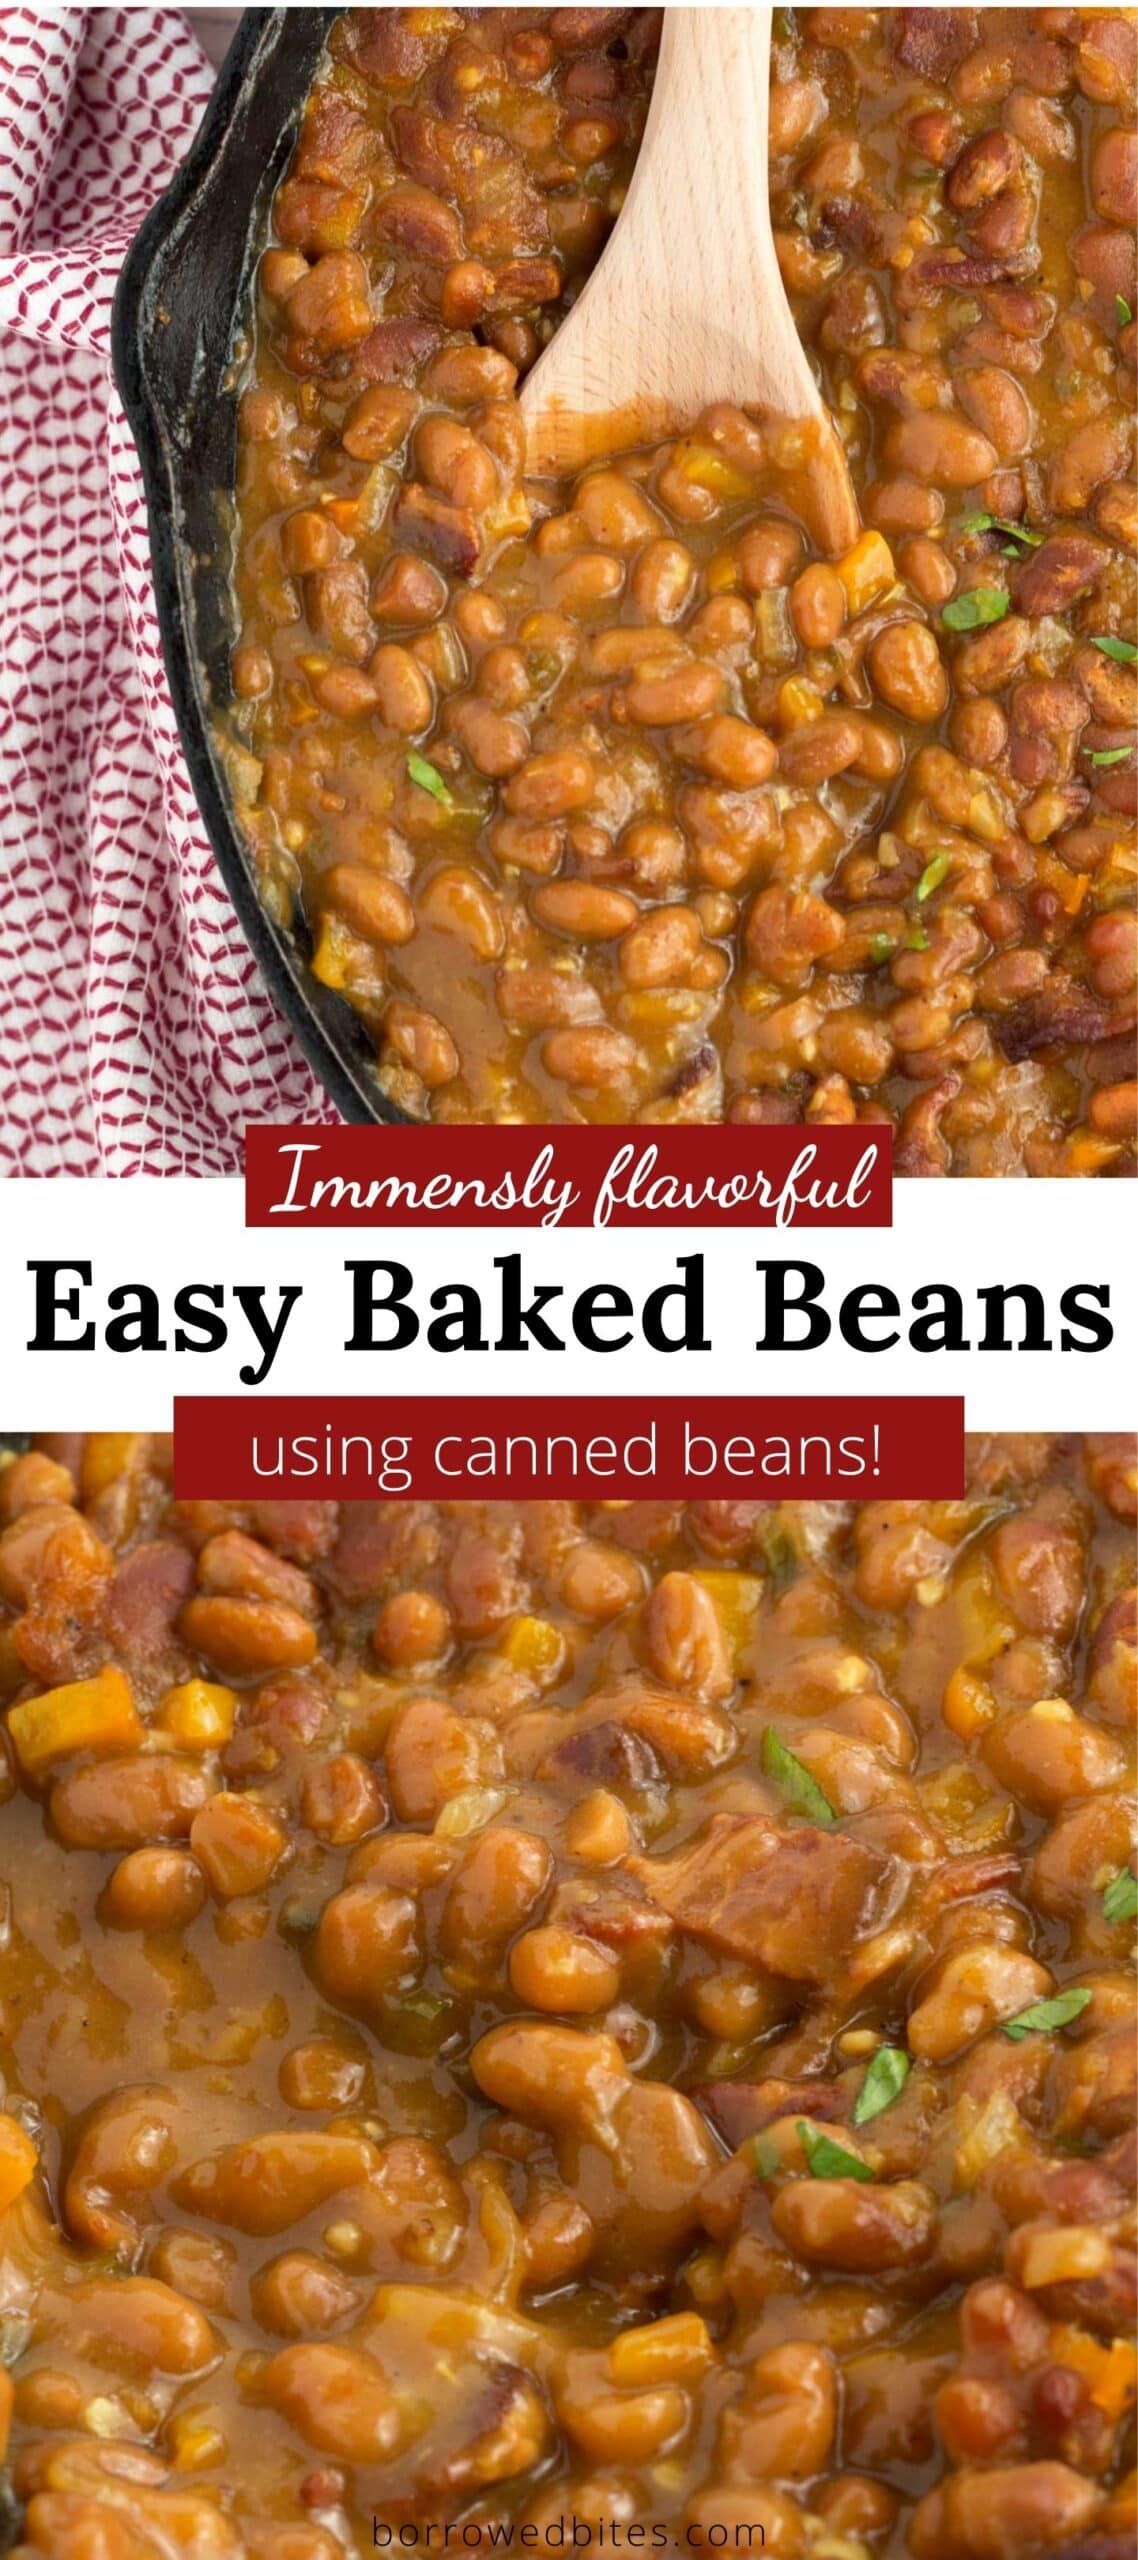 Thick & Rich Canned Baked Beans - Borrowed Bites